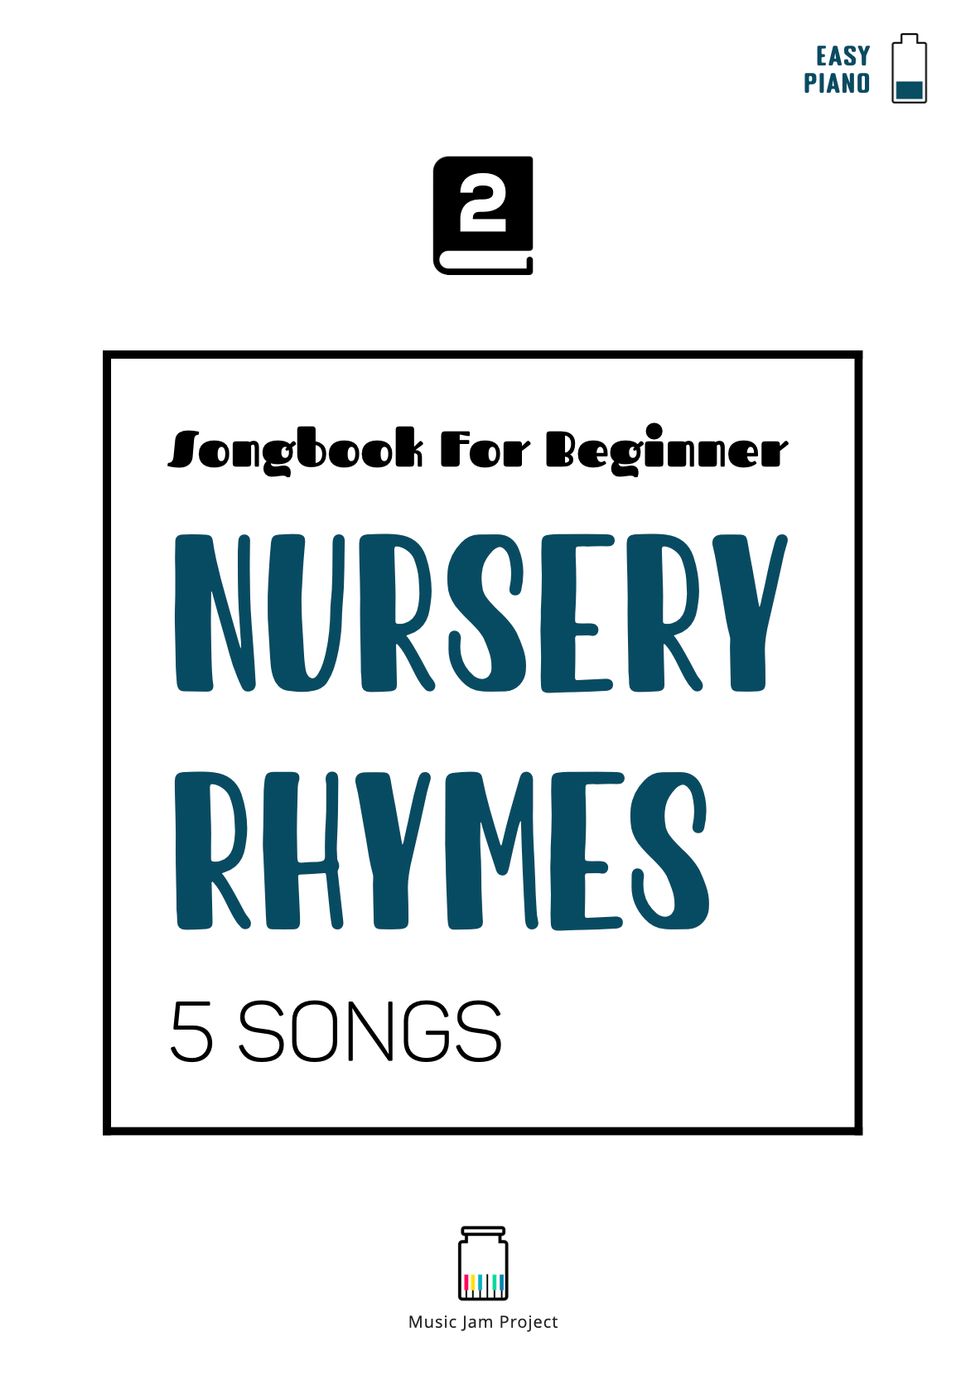 Nursery Rhymes For Beginner - Book 2 by Benny Chaw